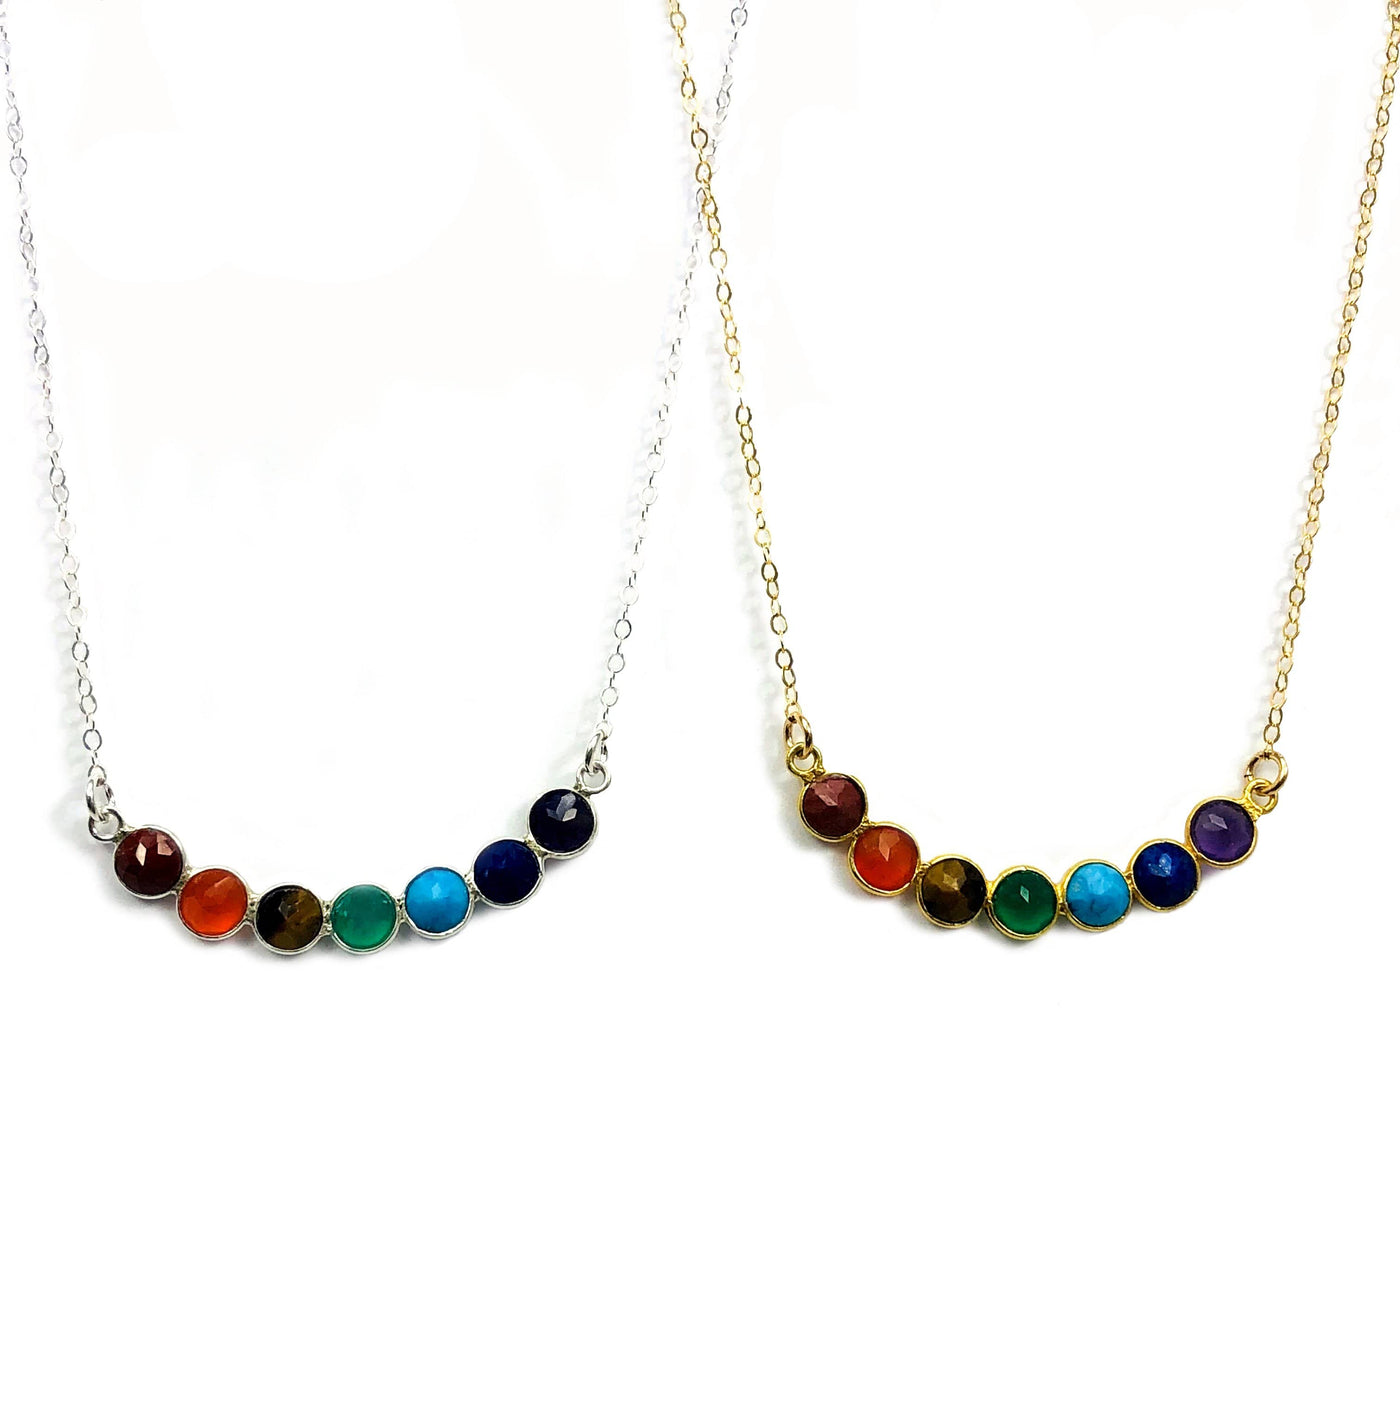 chakra necklaces displayed in gold and silver 